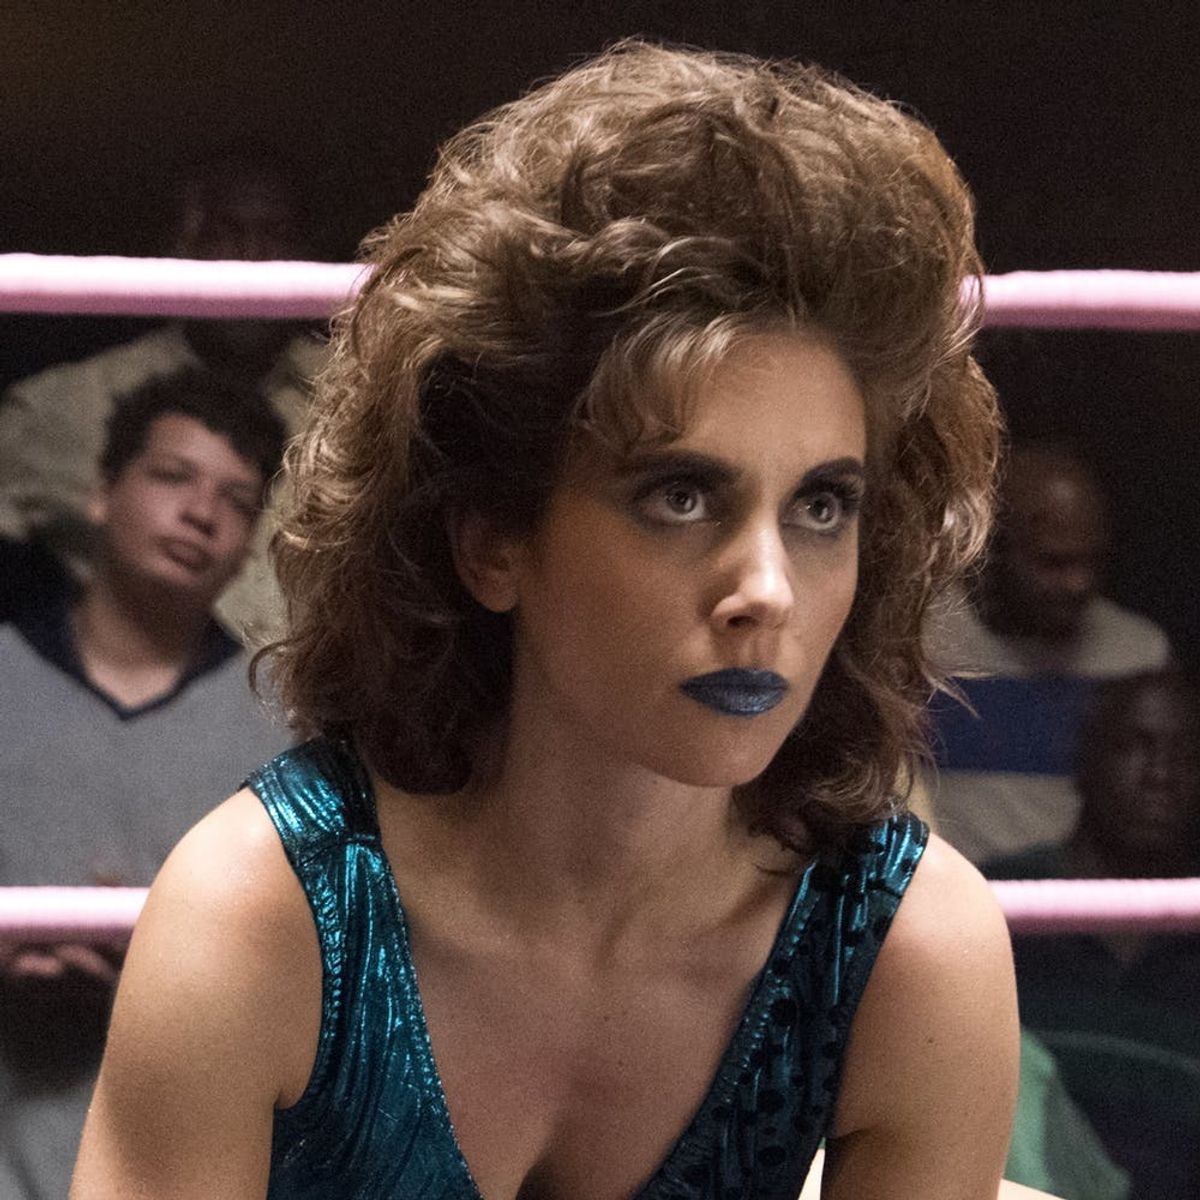 Alison Brie Says Her Nude Scenes in “GLOW” Were Empowering for This Important Reason